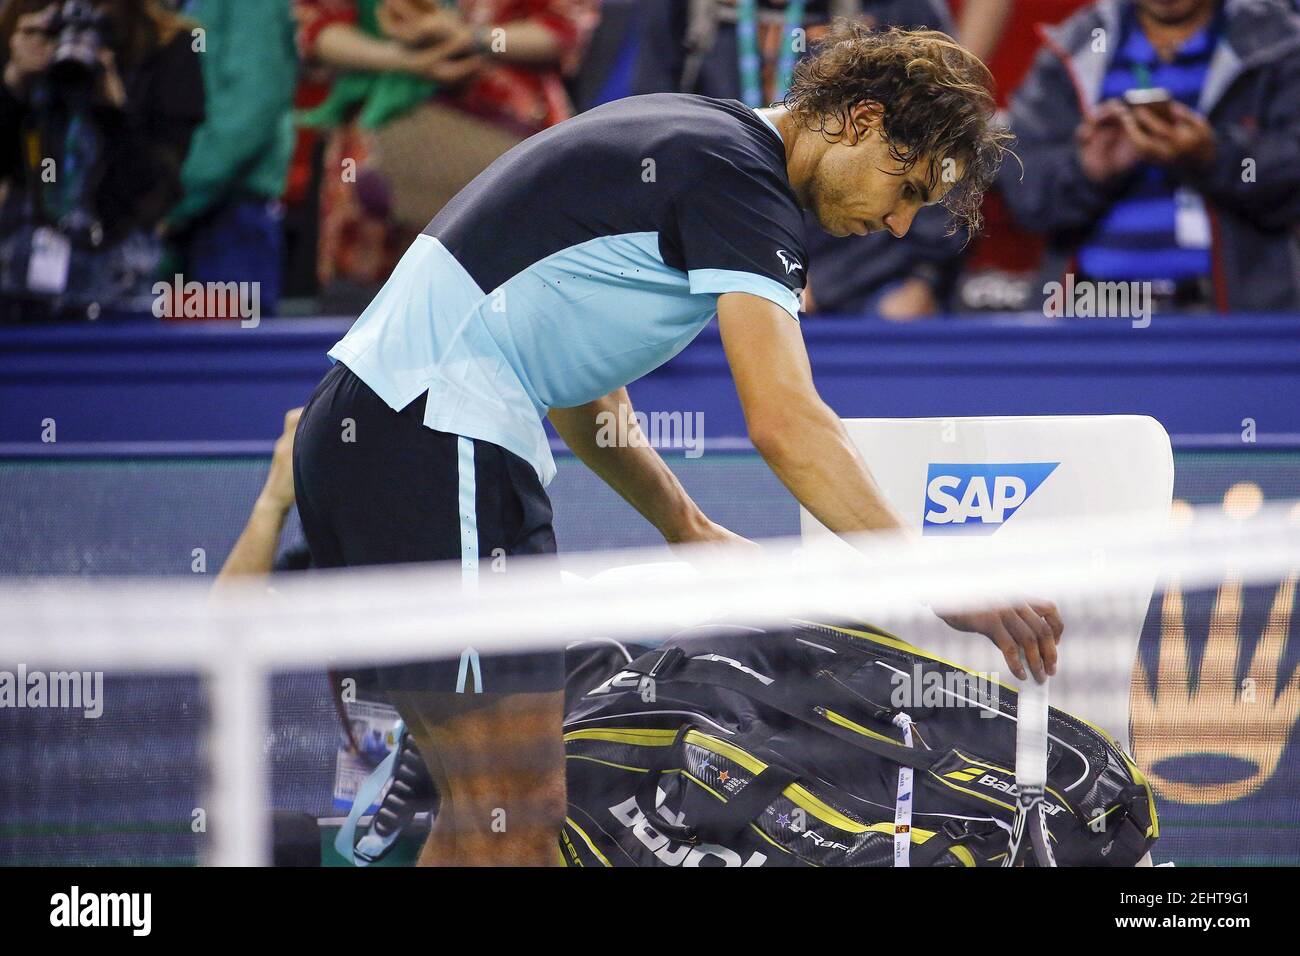 Rafael Nadal of Spain prepares to leave the court after losing to Jo-Wilfried Tsonga of France in their men's singles semi-final match at the Shanghai Masters tennis tournament in Shanghai, China, October 17, 2015. REUTERS/Damir Sagolj   Picture Supplied by Action Images Stock Photo